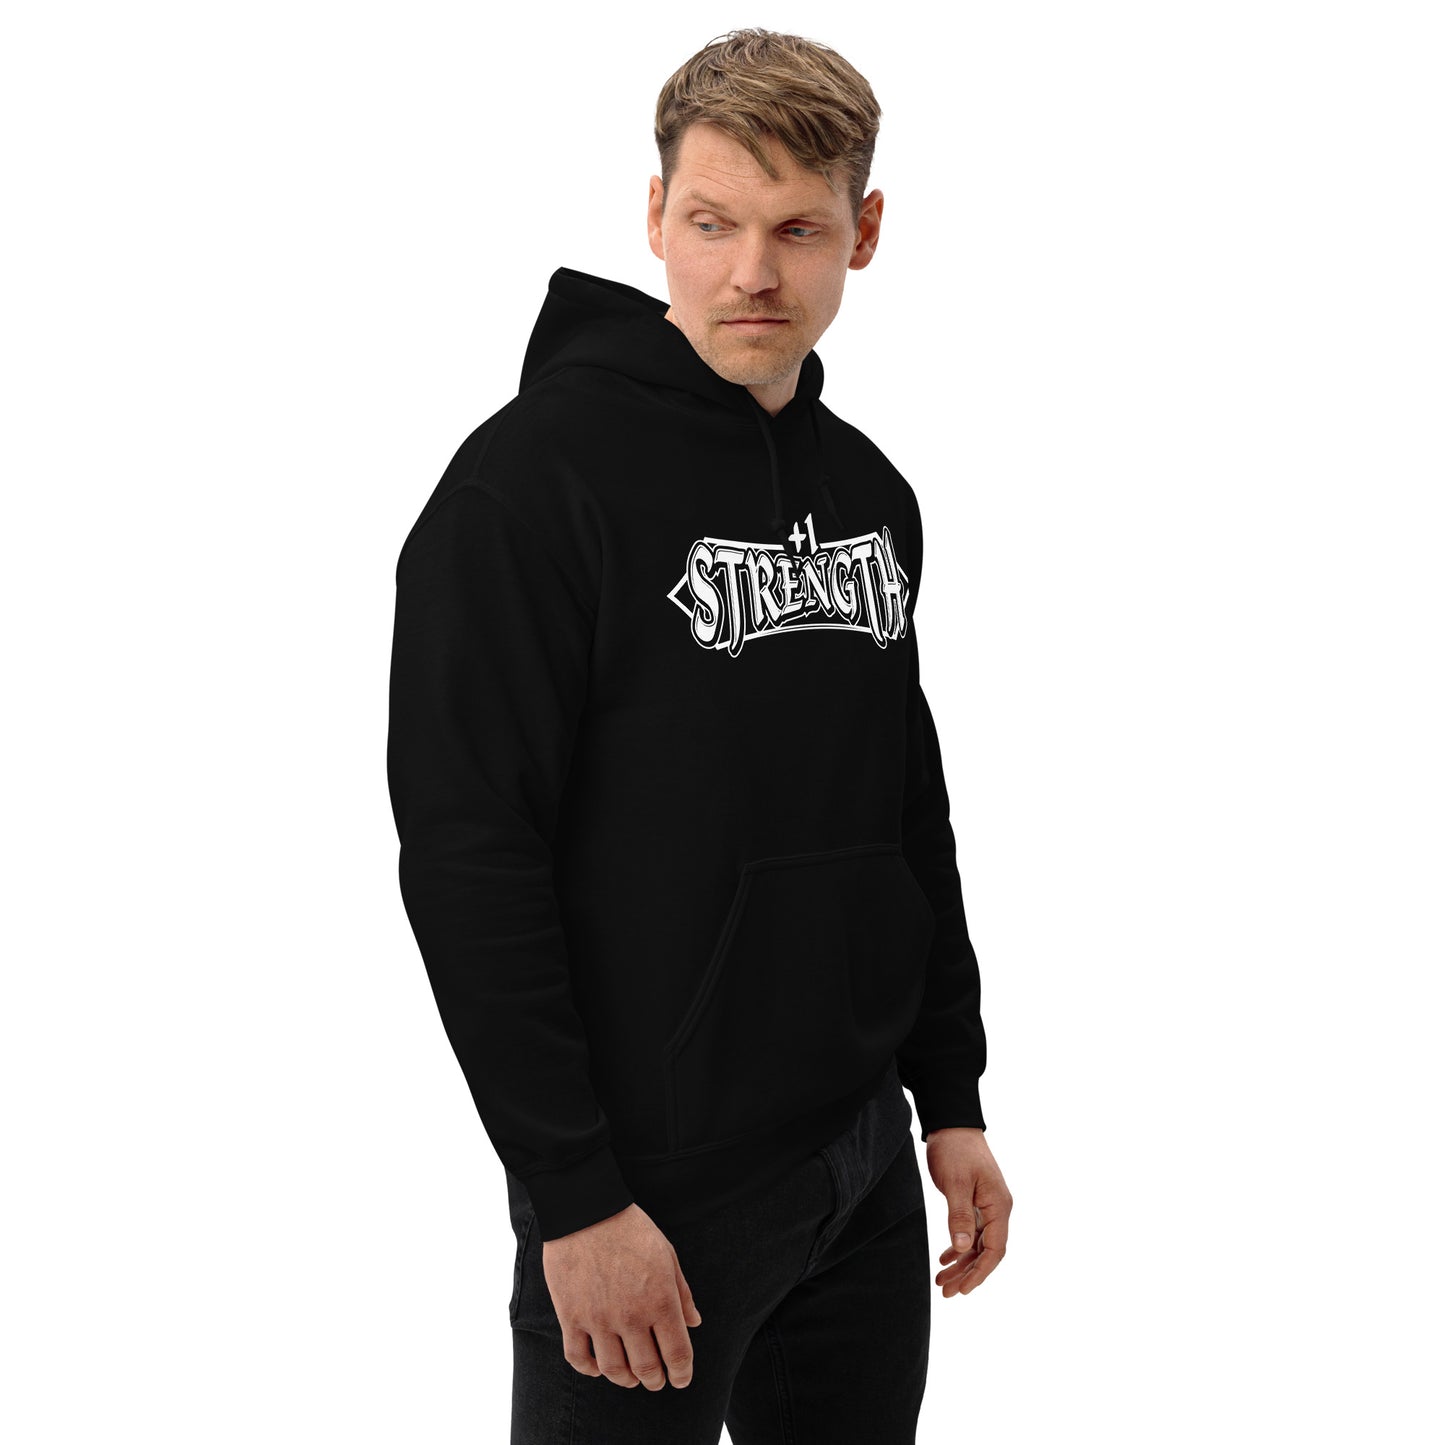 +1 Strength Graphic Hoodie